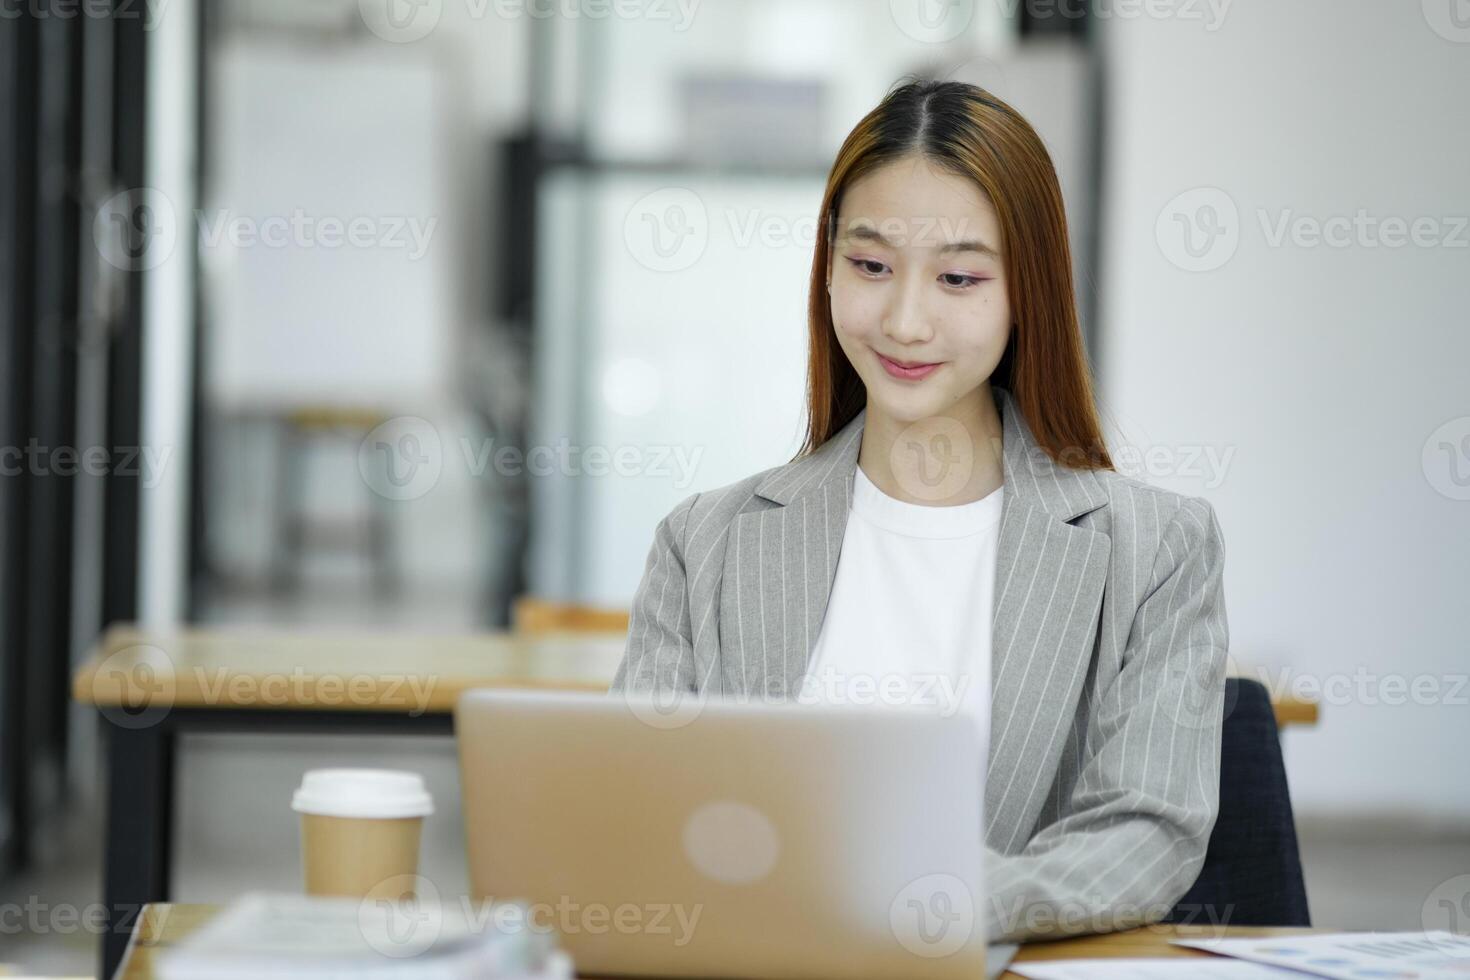 Business woman sitting working on her notebook with confidence and happiness doing a great job. photo